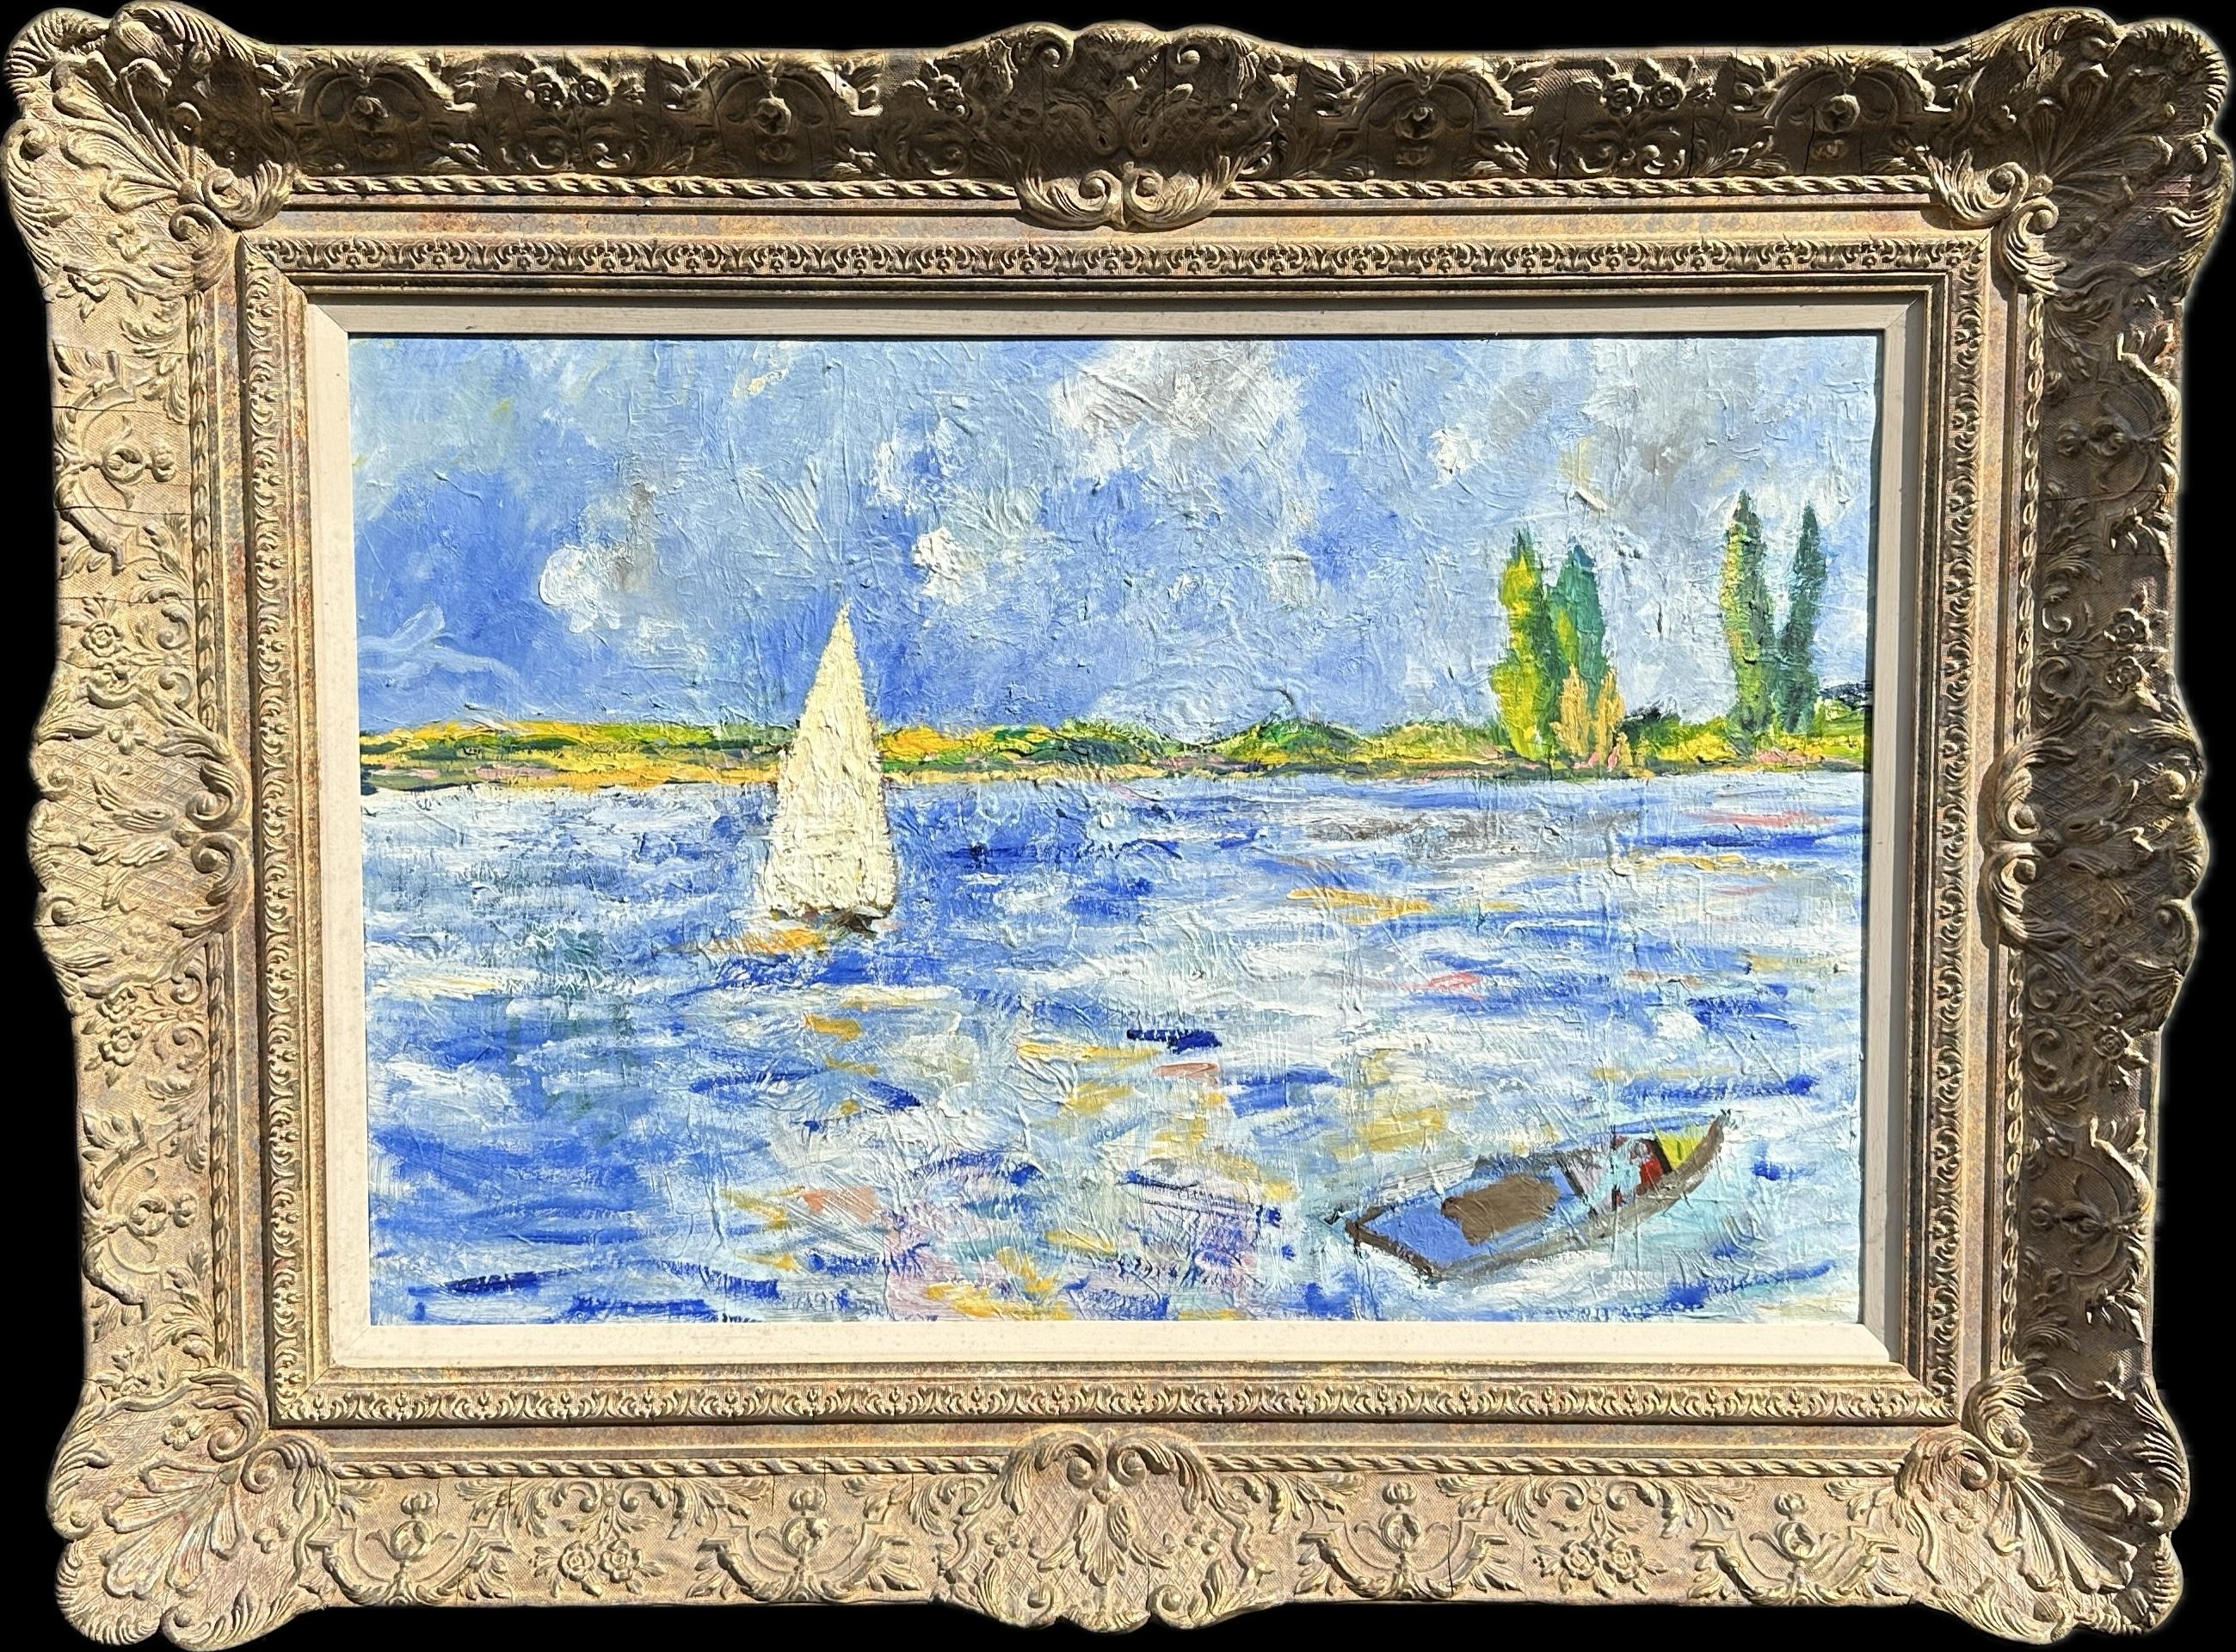 American Impressionist scene of a sail boat on a river in New England